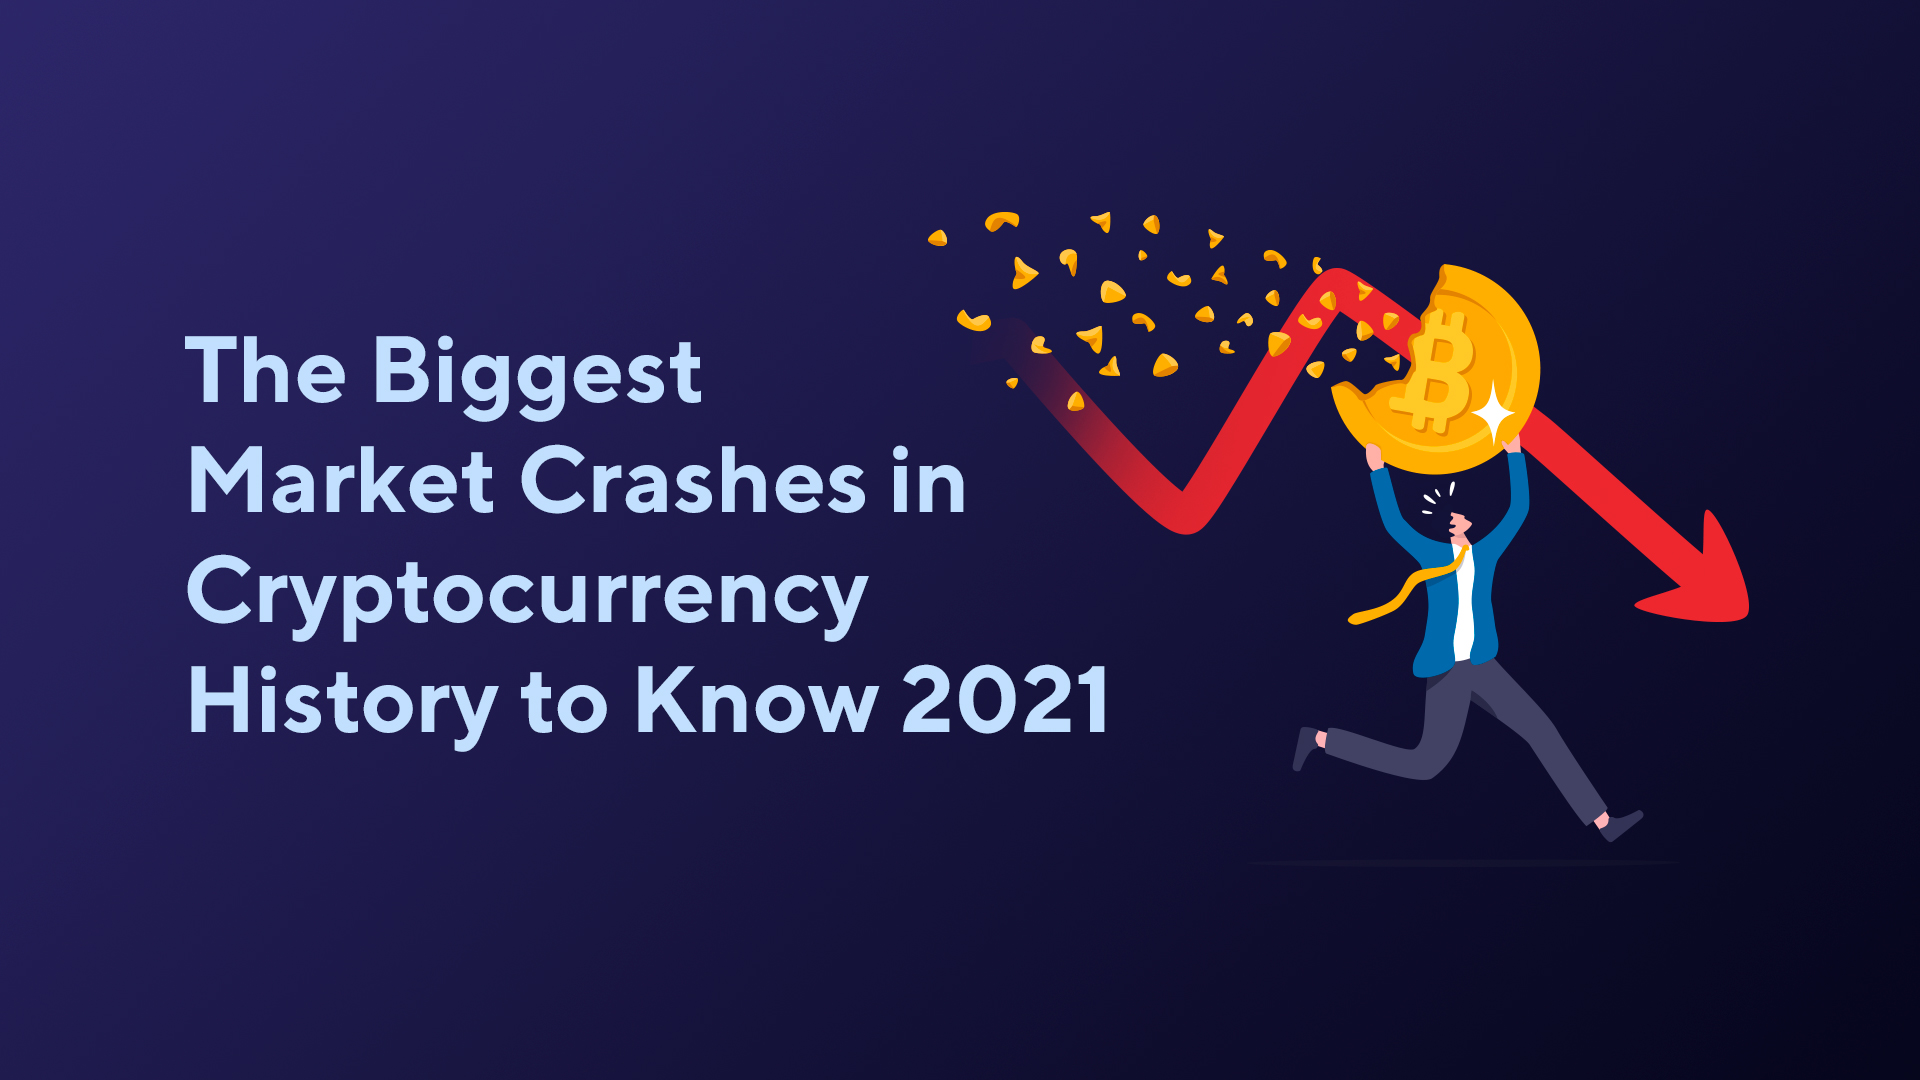 The Biggest Market Crashes in Cryptocurrency History to Know 2021